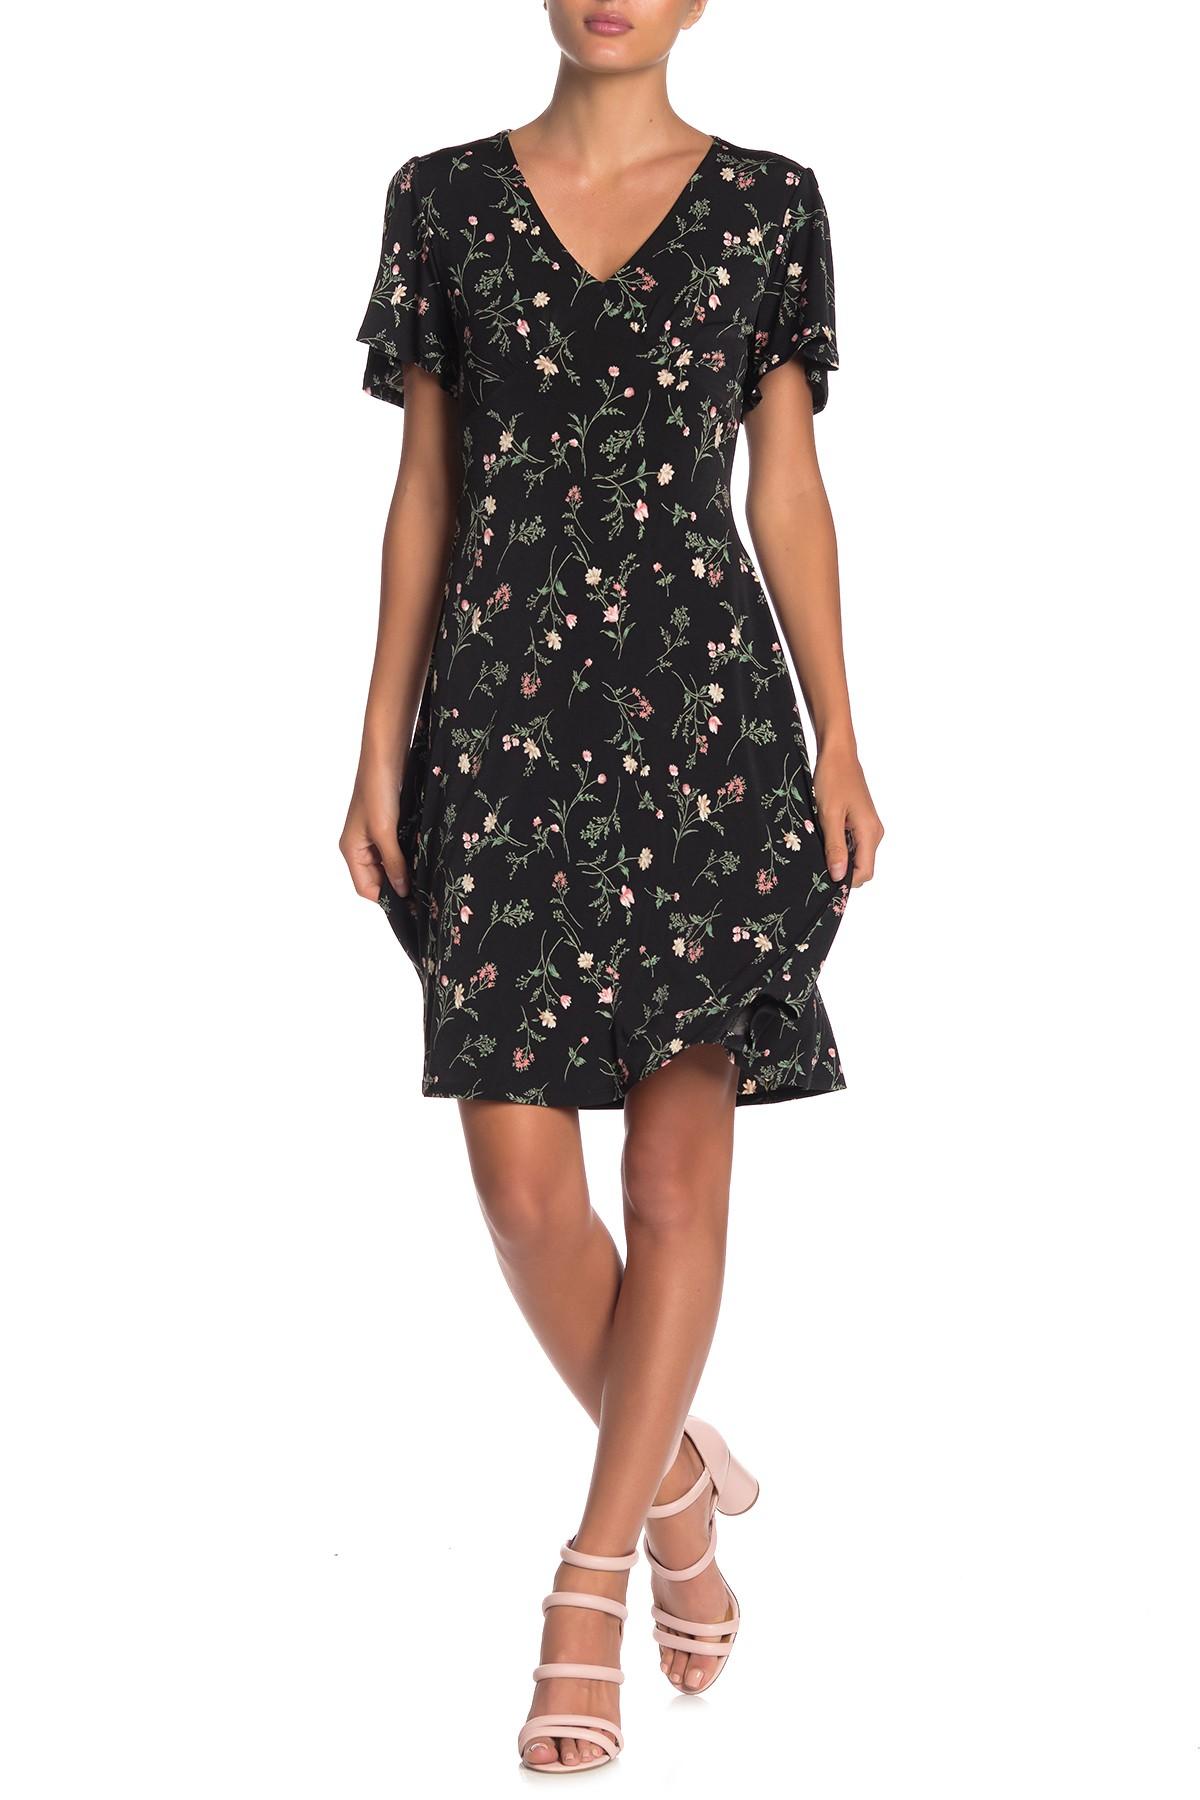 West Kei Synthetic Flutter Sleeve Floral Print Knit Dress in Black - Lyst